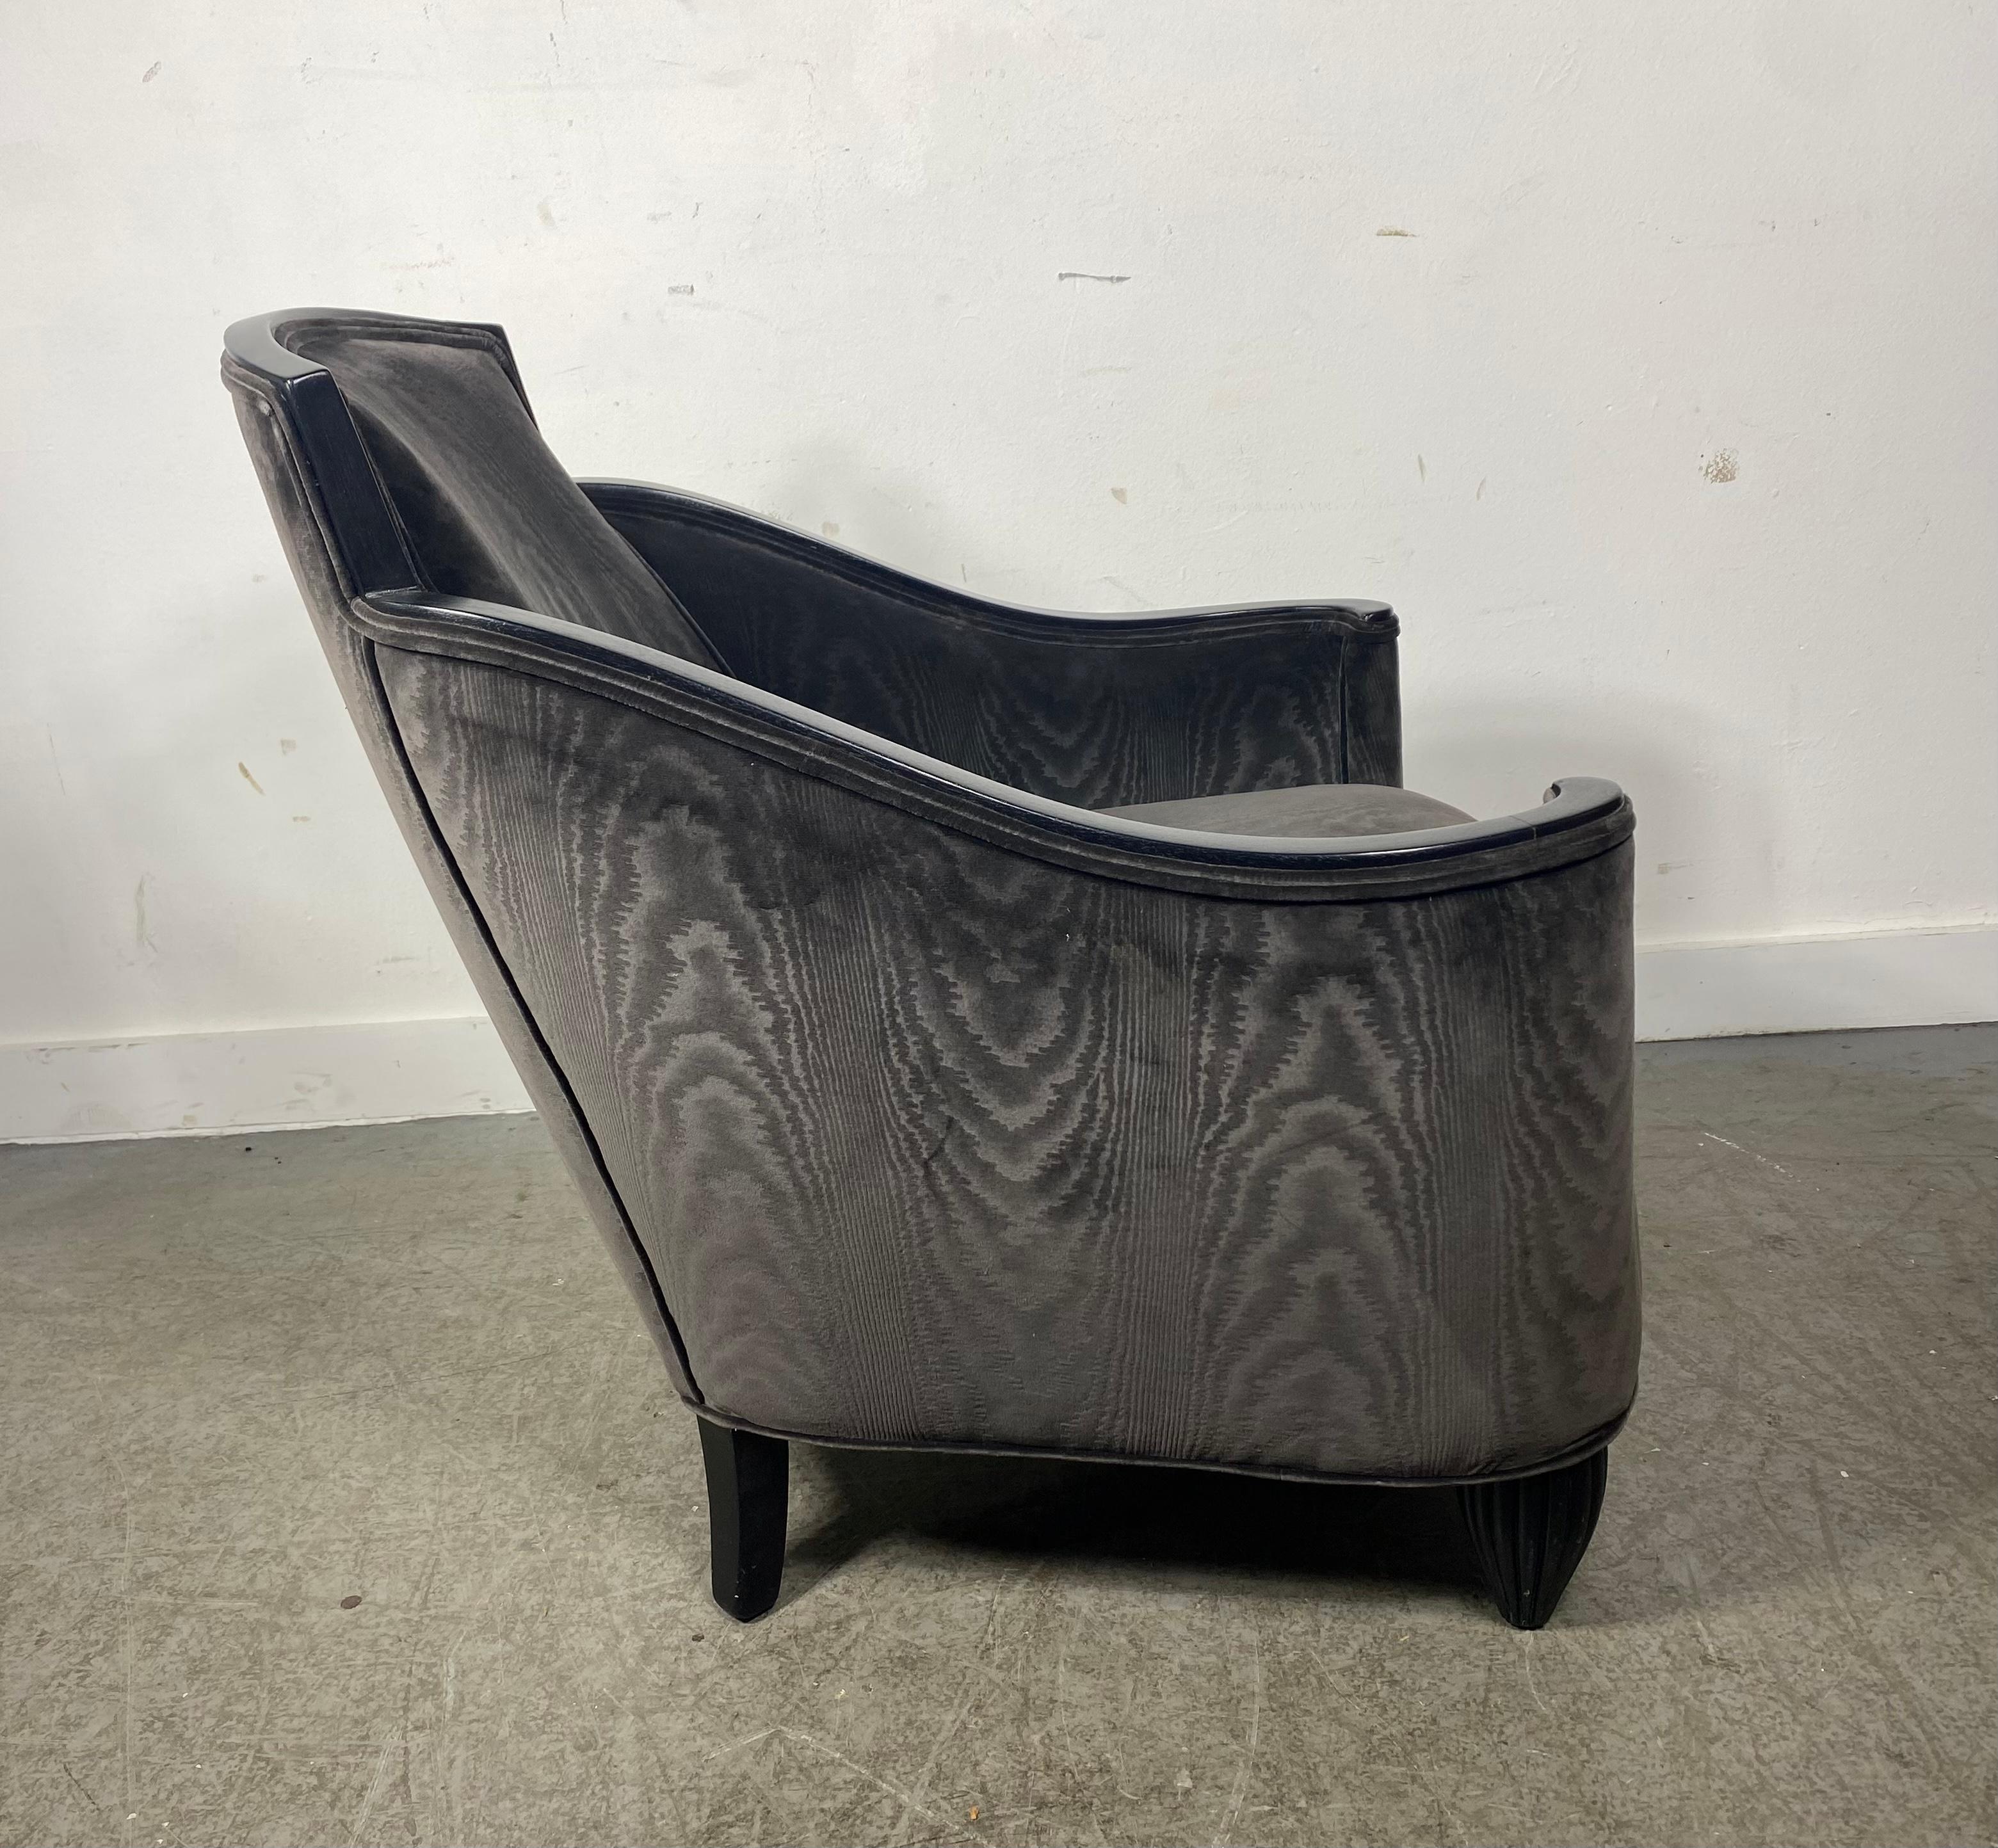 Stunning French Art Deco Lounge Chair, velvet / lacquer,  attrib. to Jules Leleu In Good Condition For Sale In Buffalo, NY